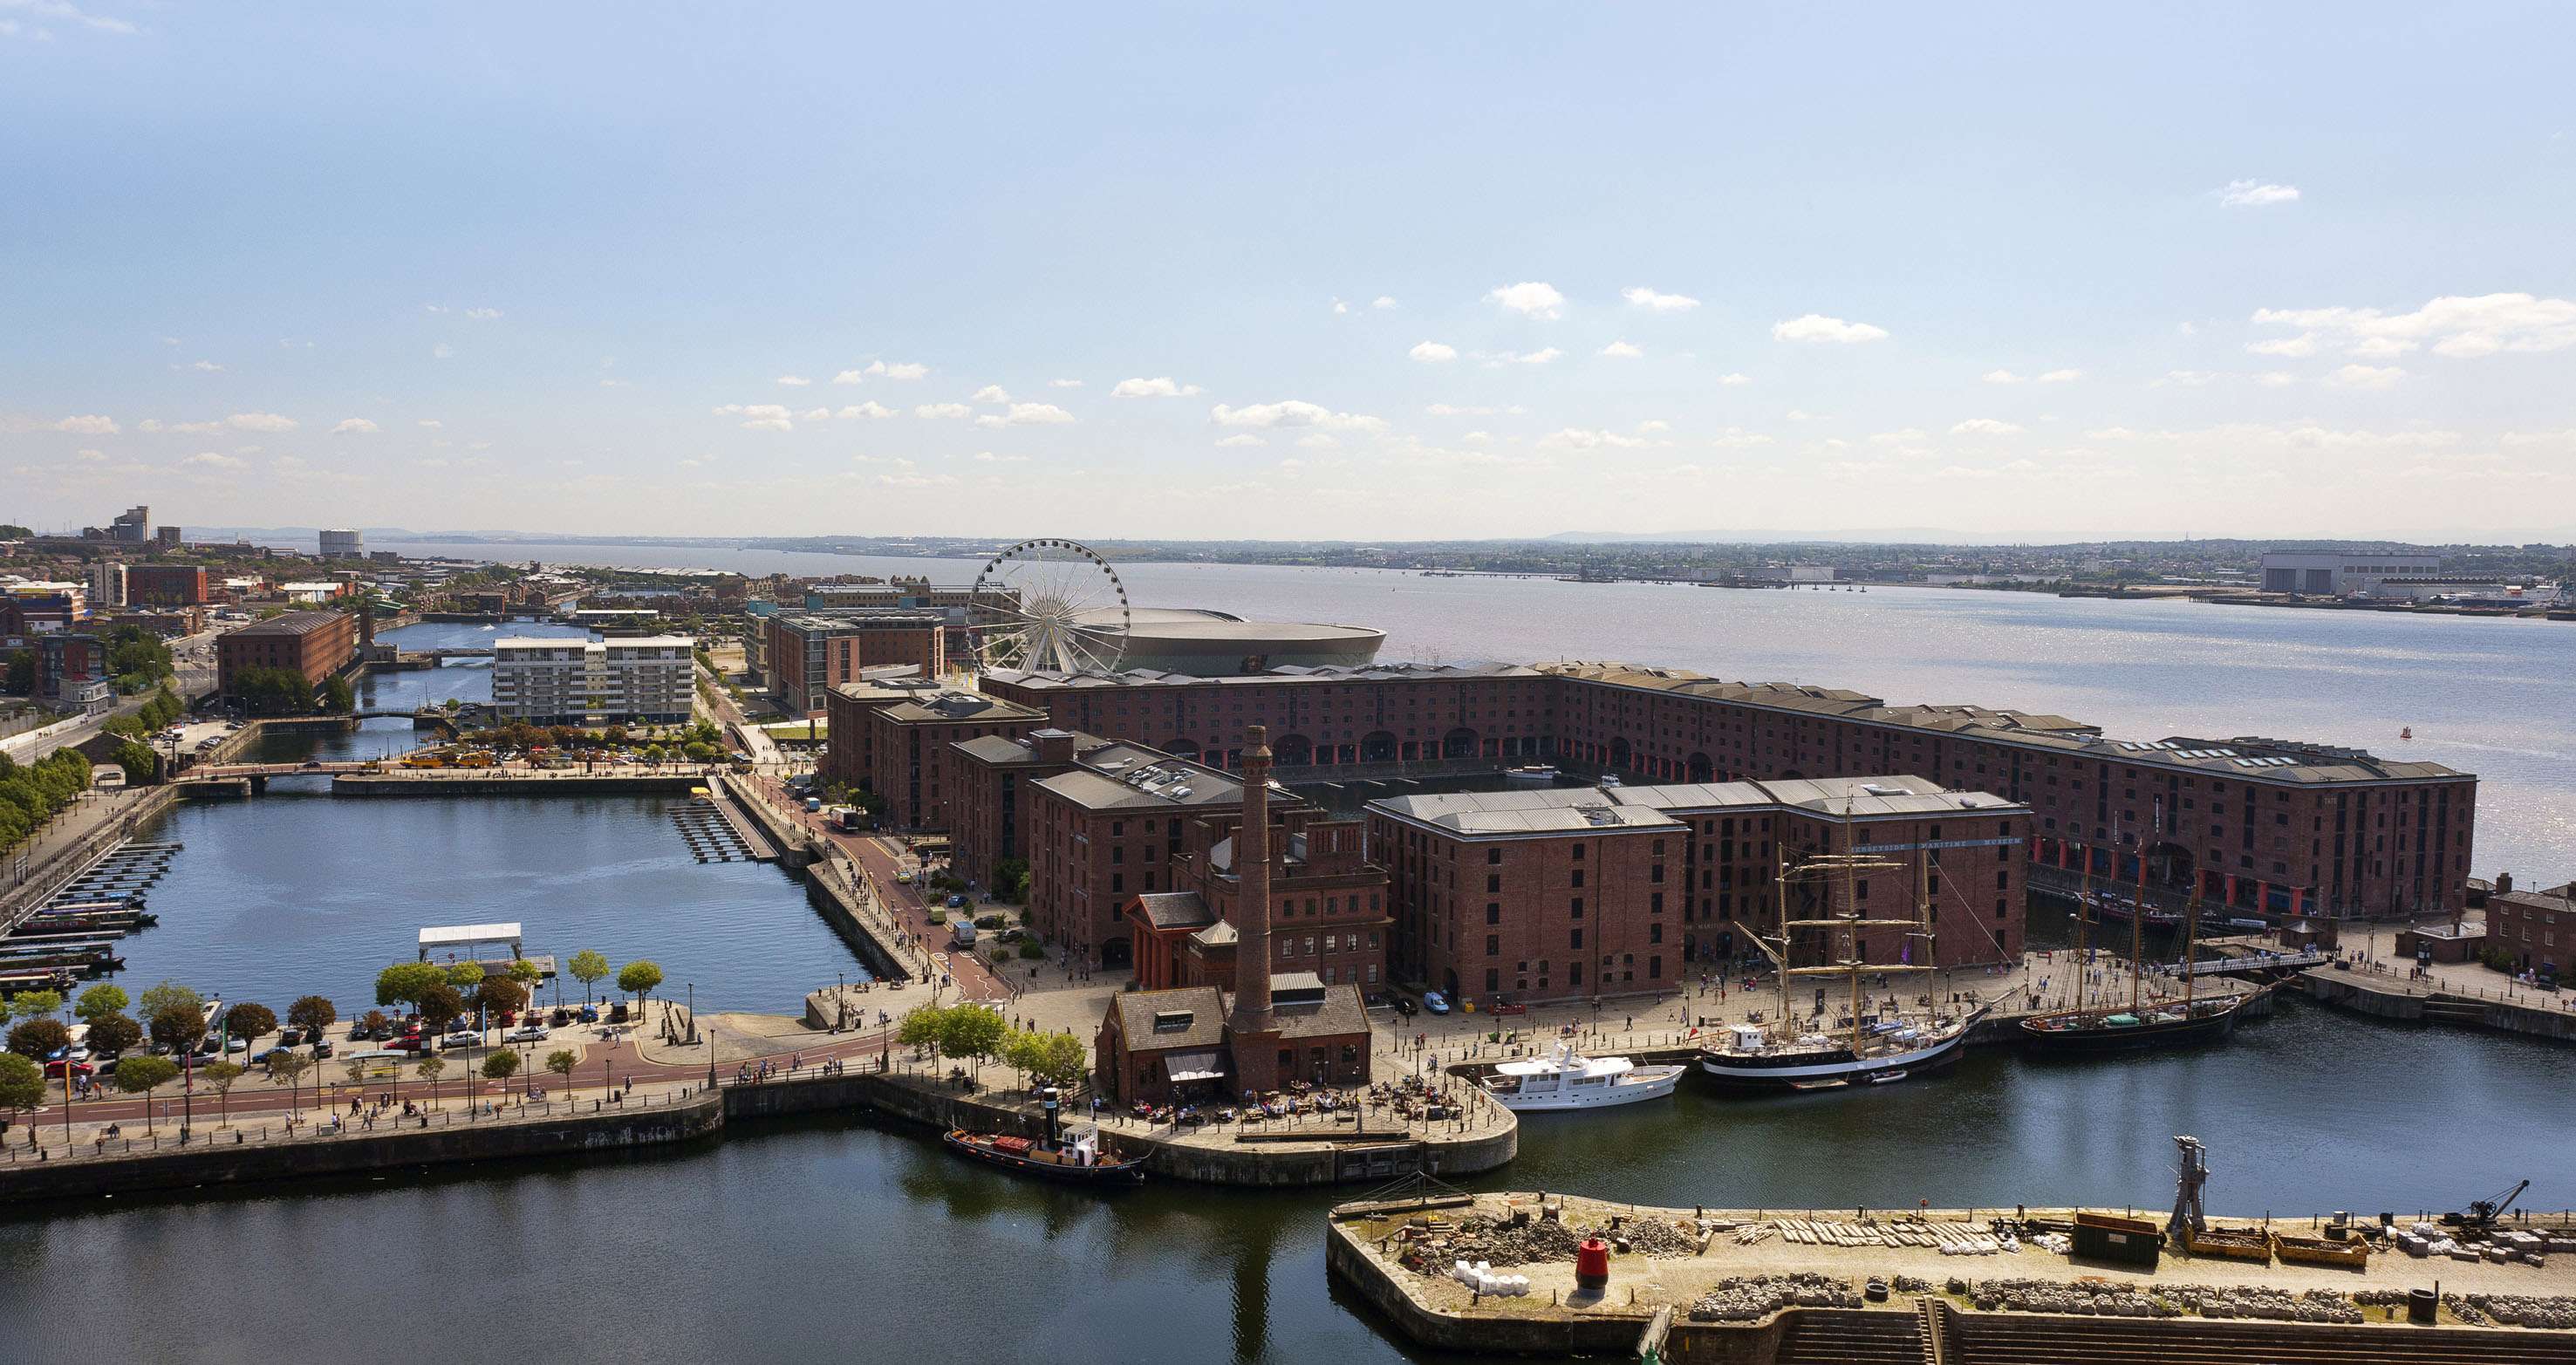 The famous Albert Dock in Liverpool. Average private rents in the city were up 11 per cent in 2015 and are expected to increase by a further 22 per cent before 2020. Photo: Andrew Smith SG Photography Ltd